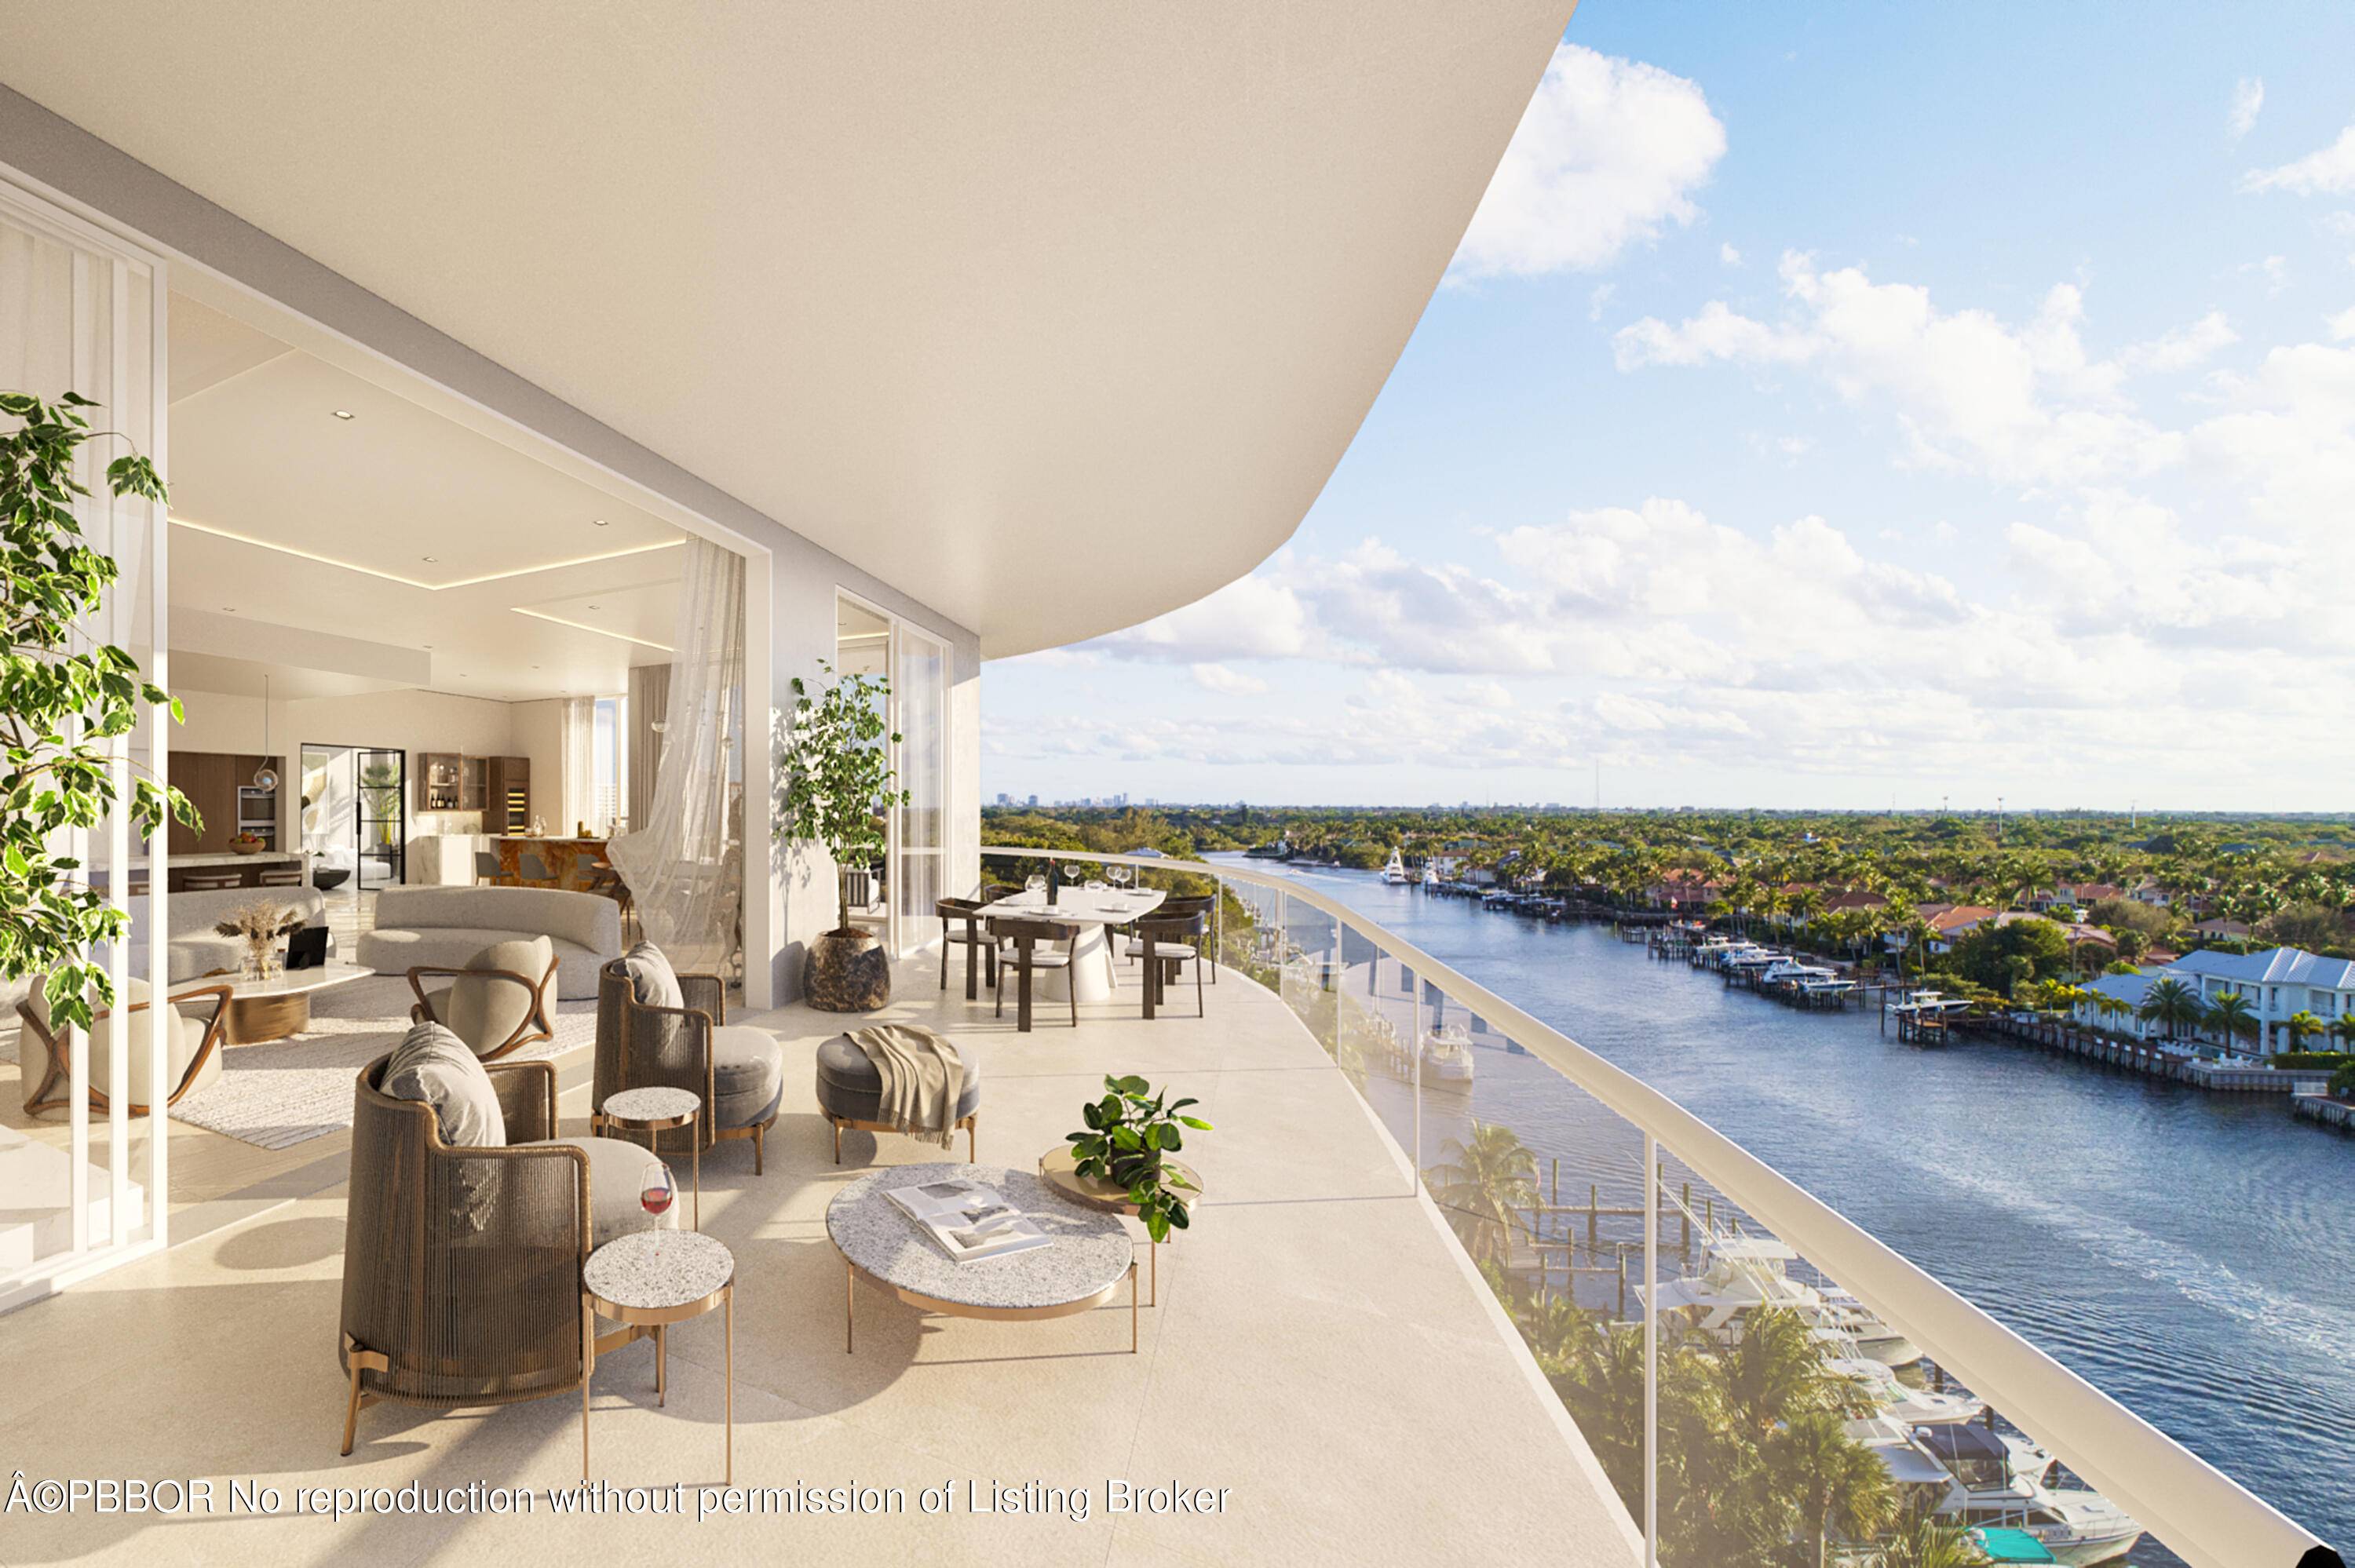 Embark on refined luxury at The Ritz Carlton Residences now under construction on a 14 acre, one of a kind property along the intracoastal waterway in the heart of Palm ...